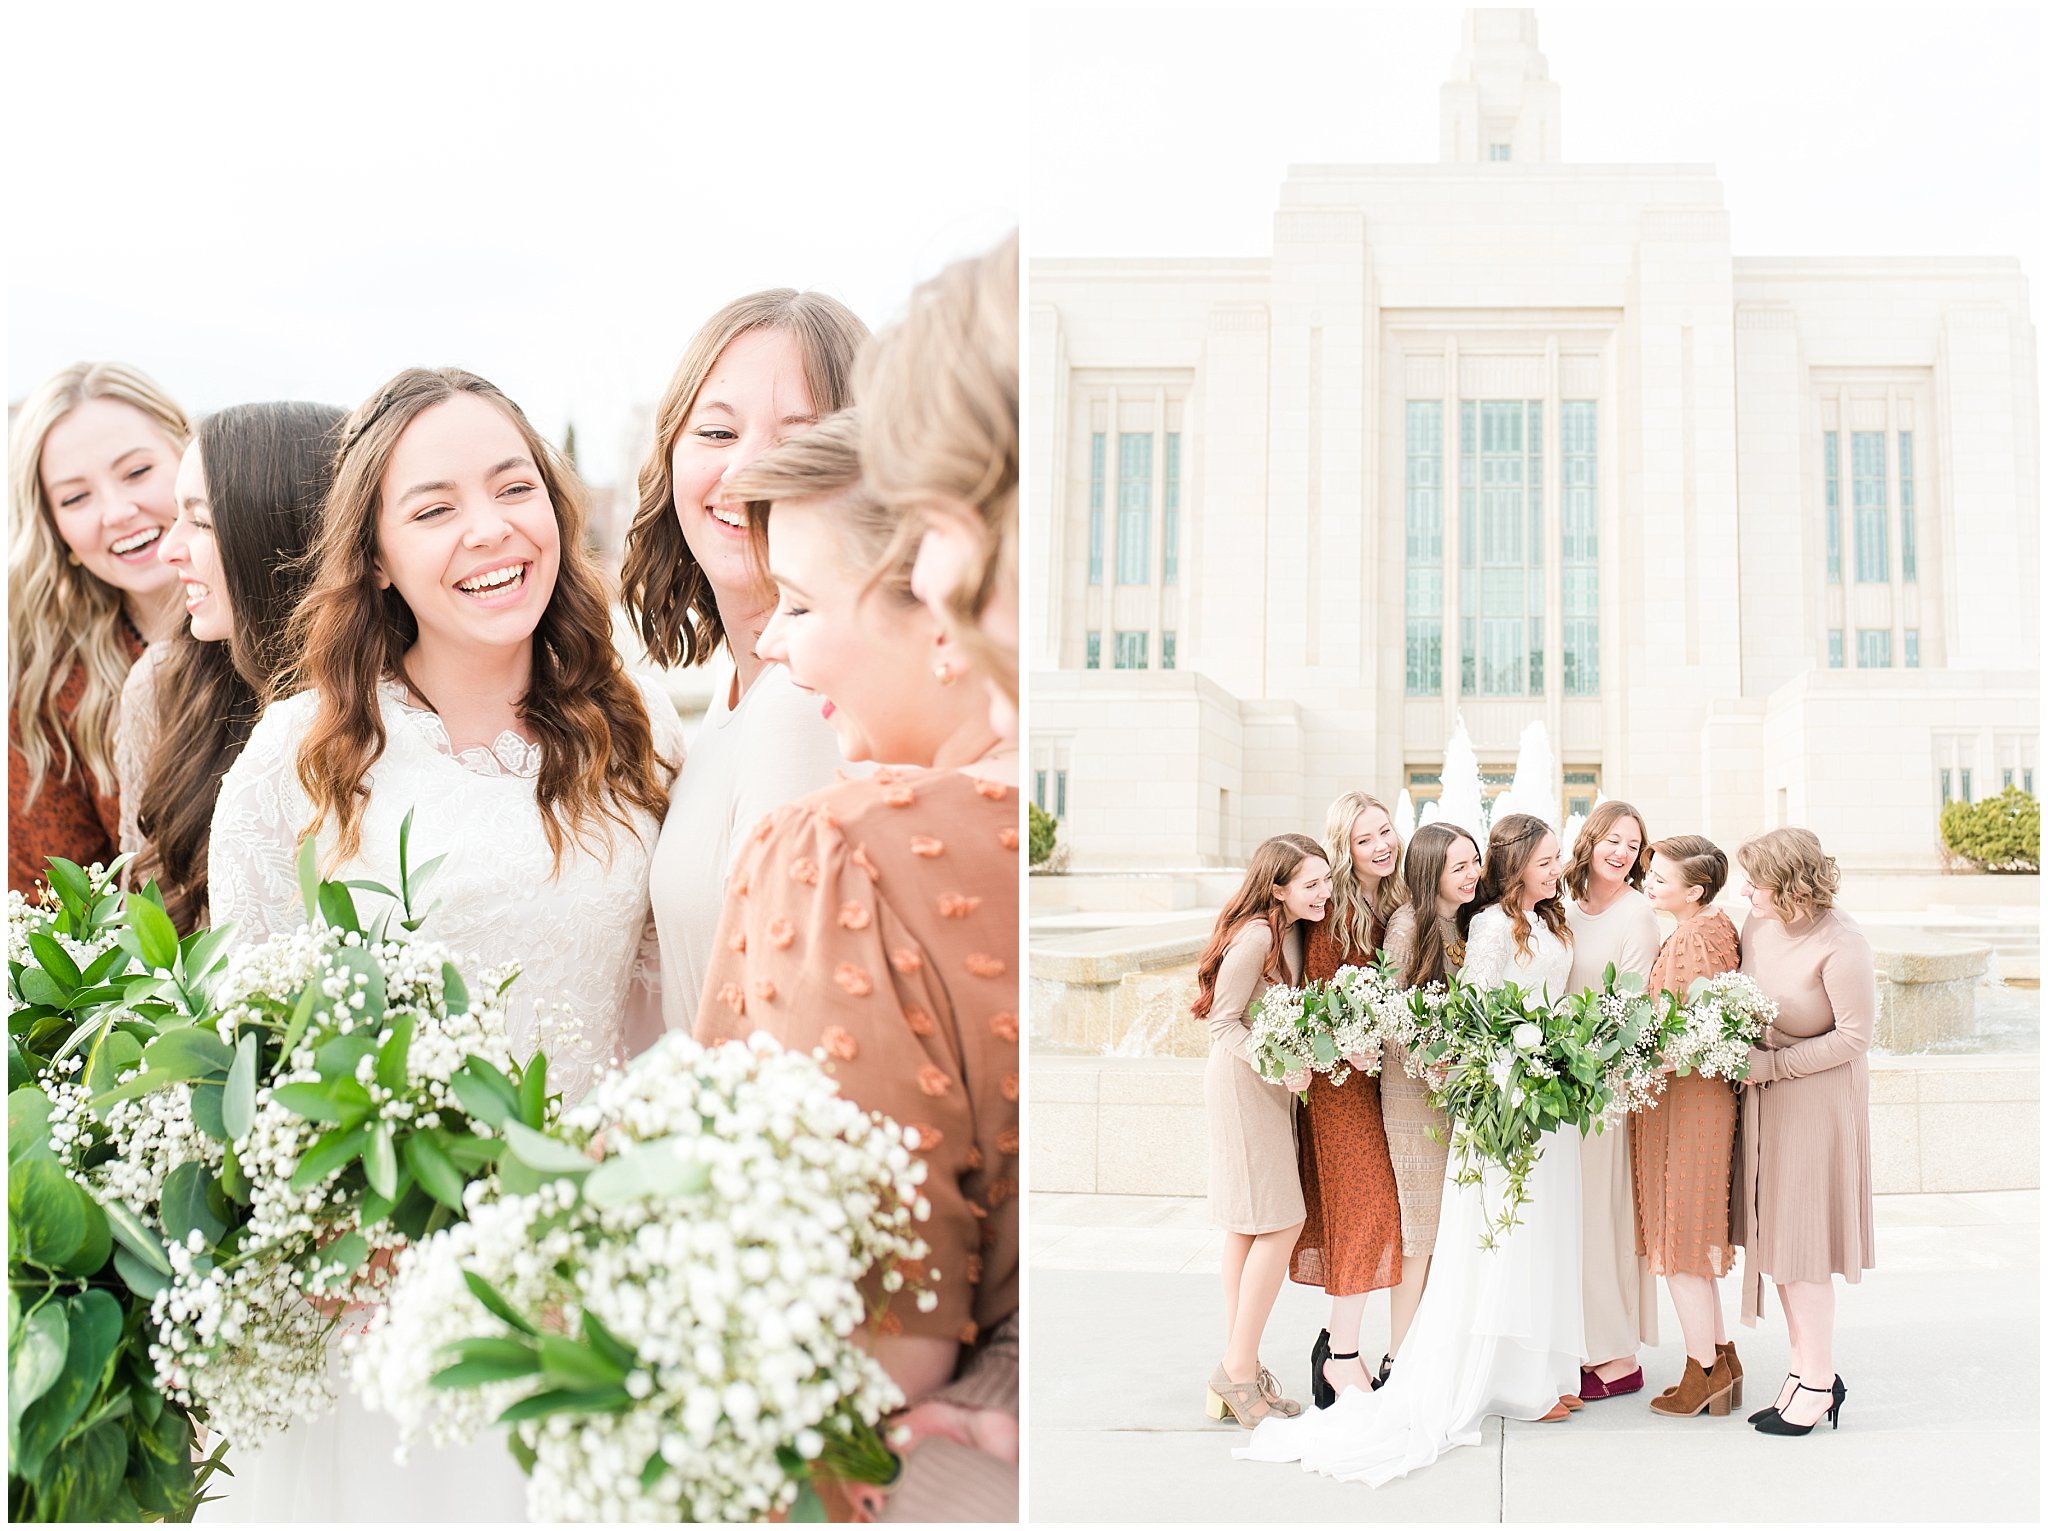 Bridesmaid portraits in shades of brown dresses with green and white florals during Ogden Temple winter wedding | Brown, Emerald Green, and white wedding | Ogden Temple and Sweet Magnolia Wedding | Jessie and Dallin Photography